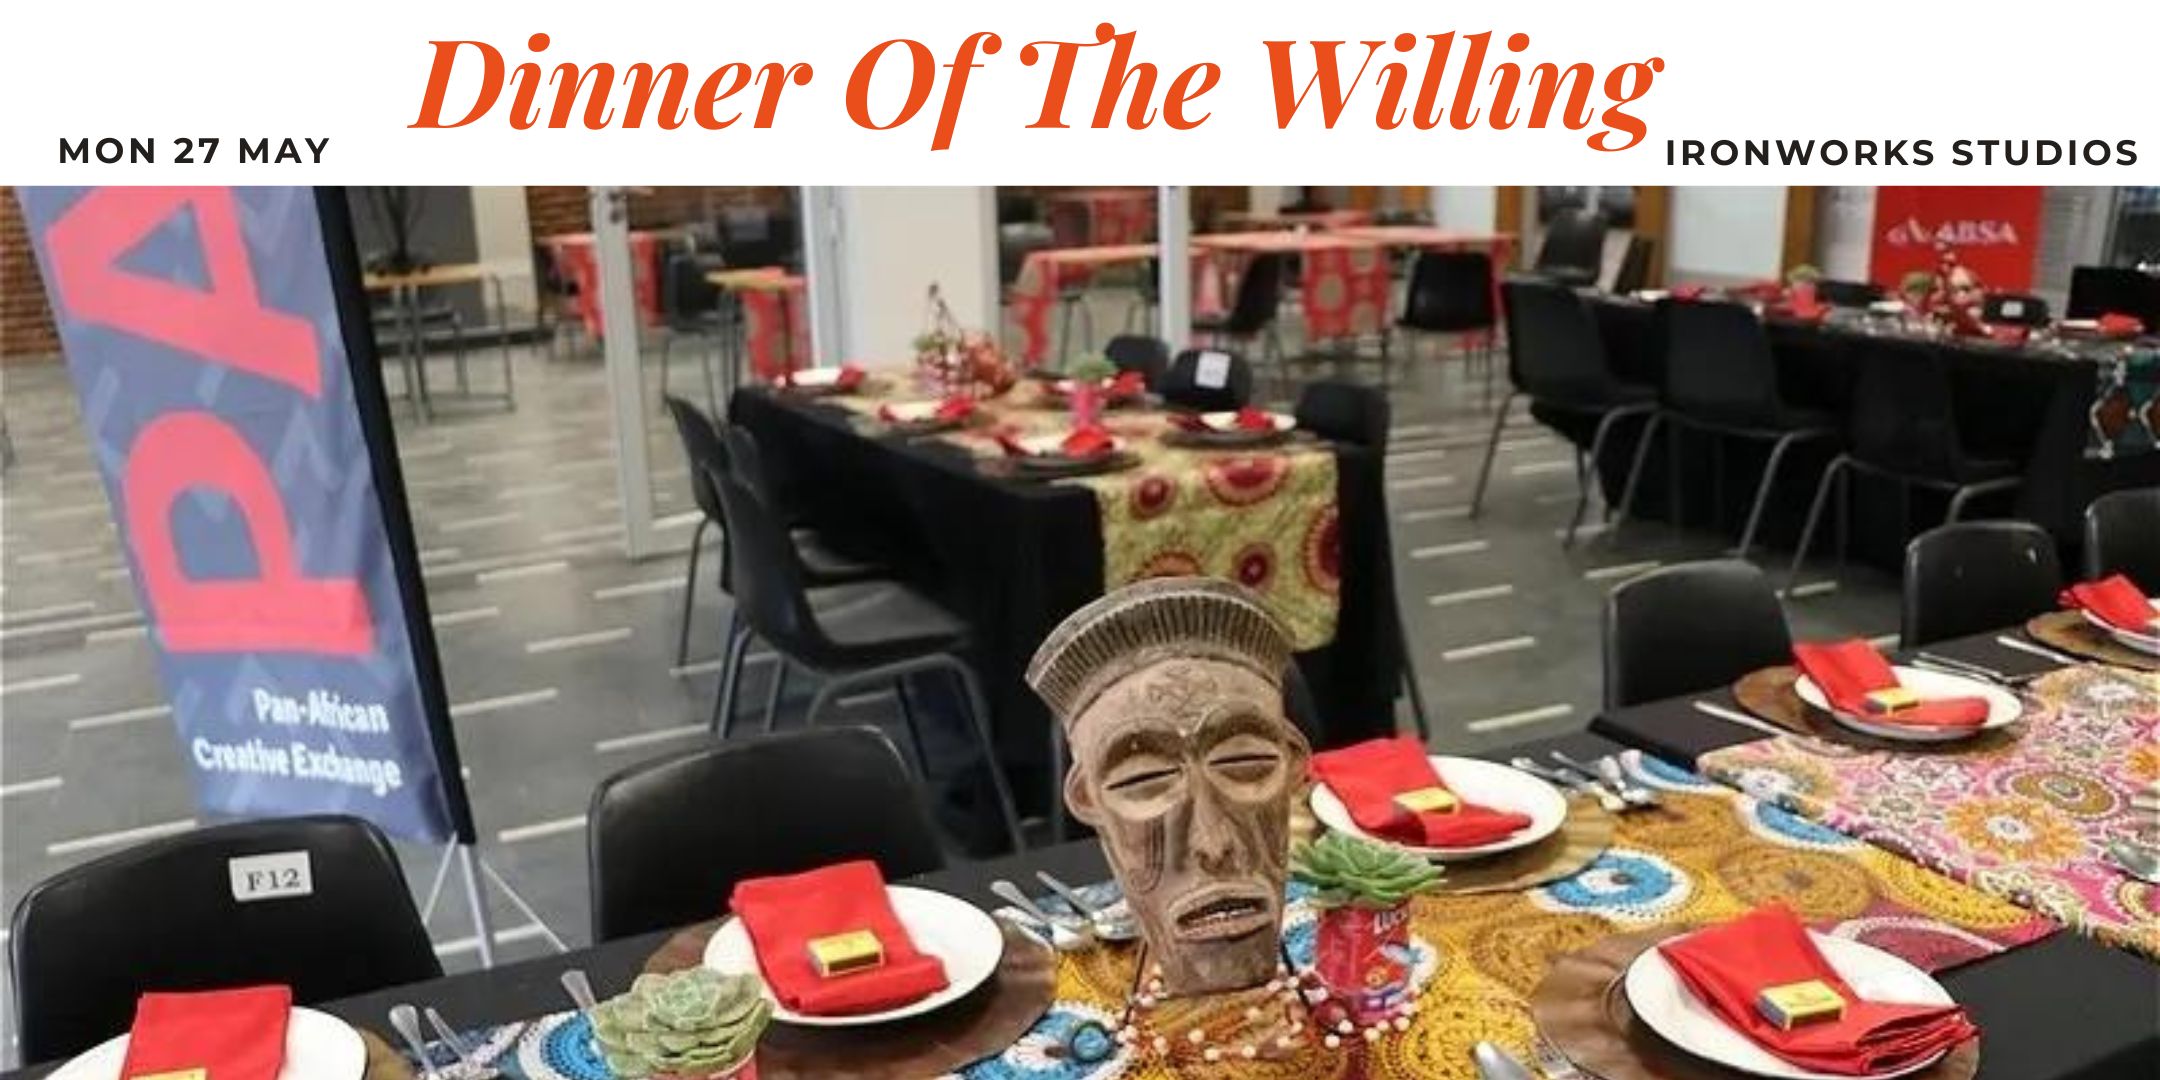 27th May- Dinner Of The Willing